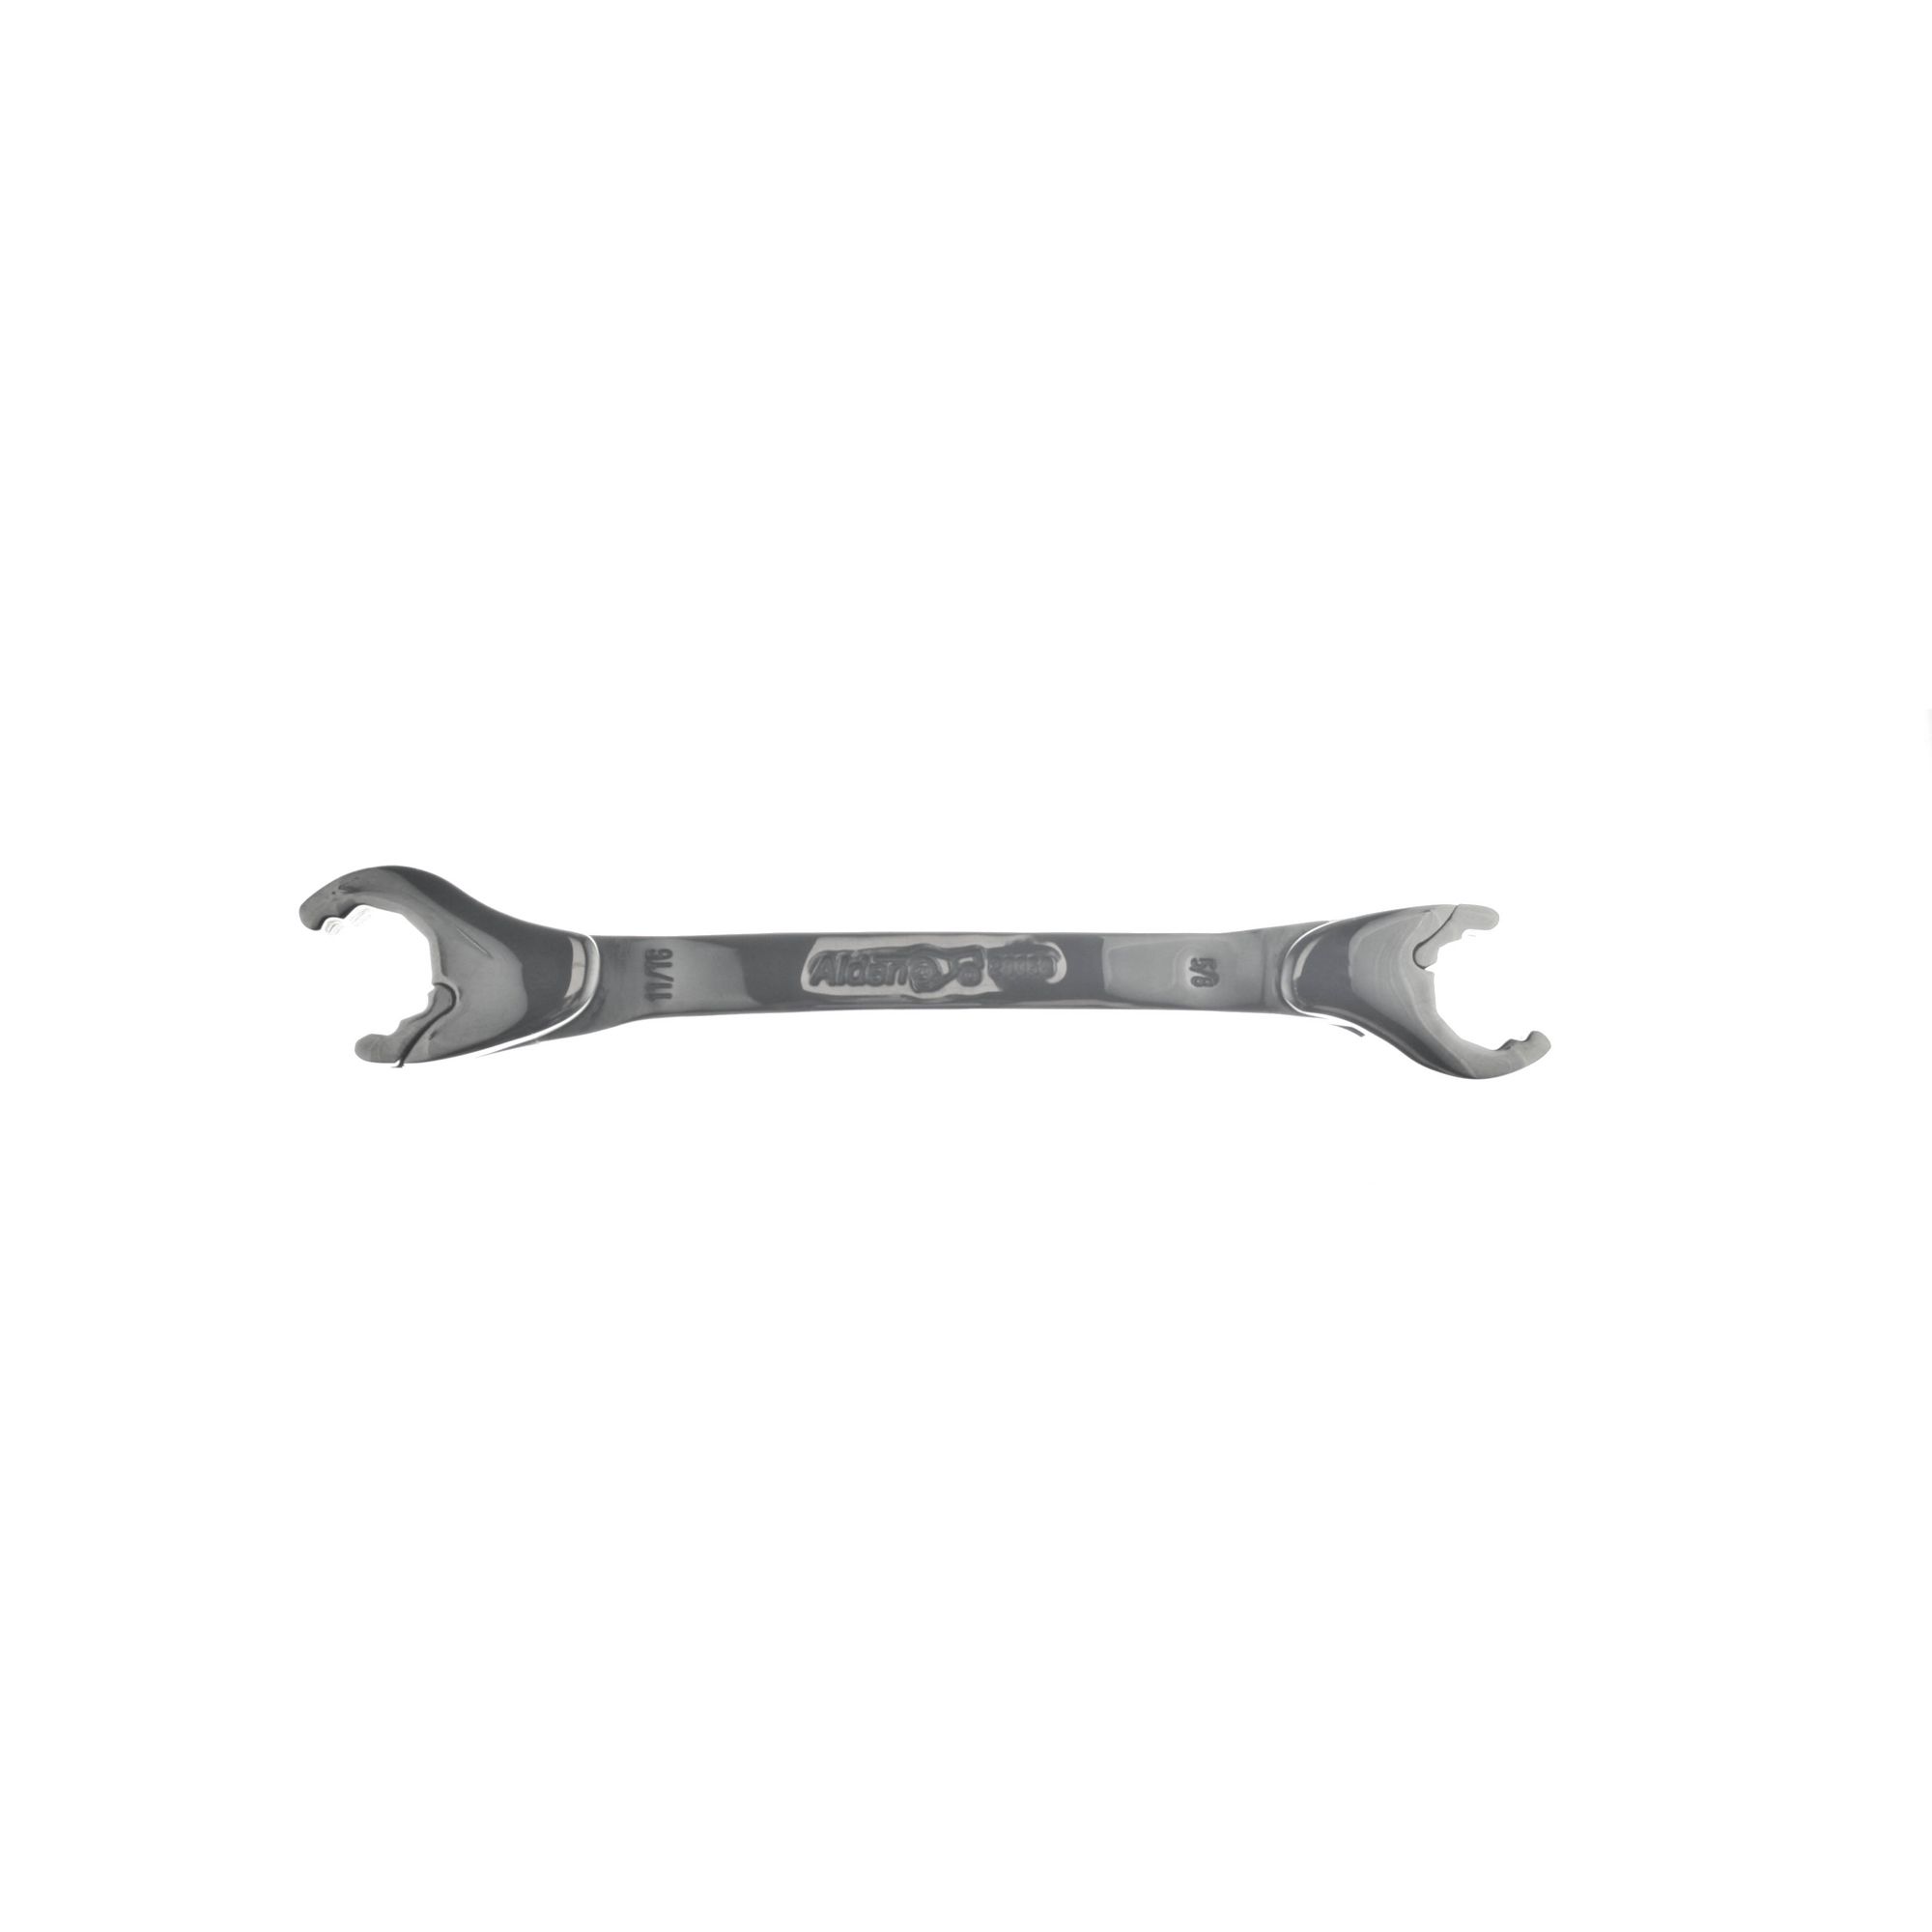 Chicago Brand 5/8 - 11/16" Open-End Ratchet Combination Wrench